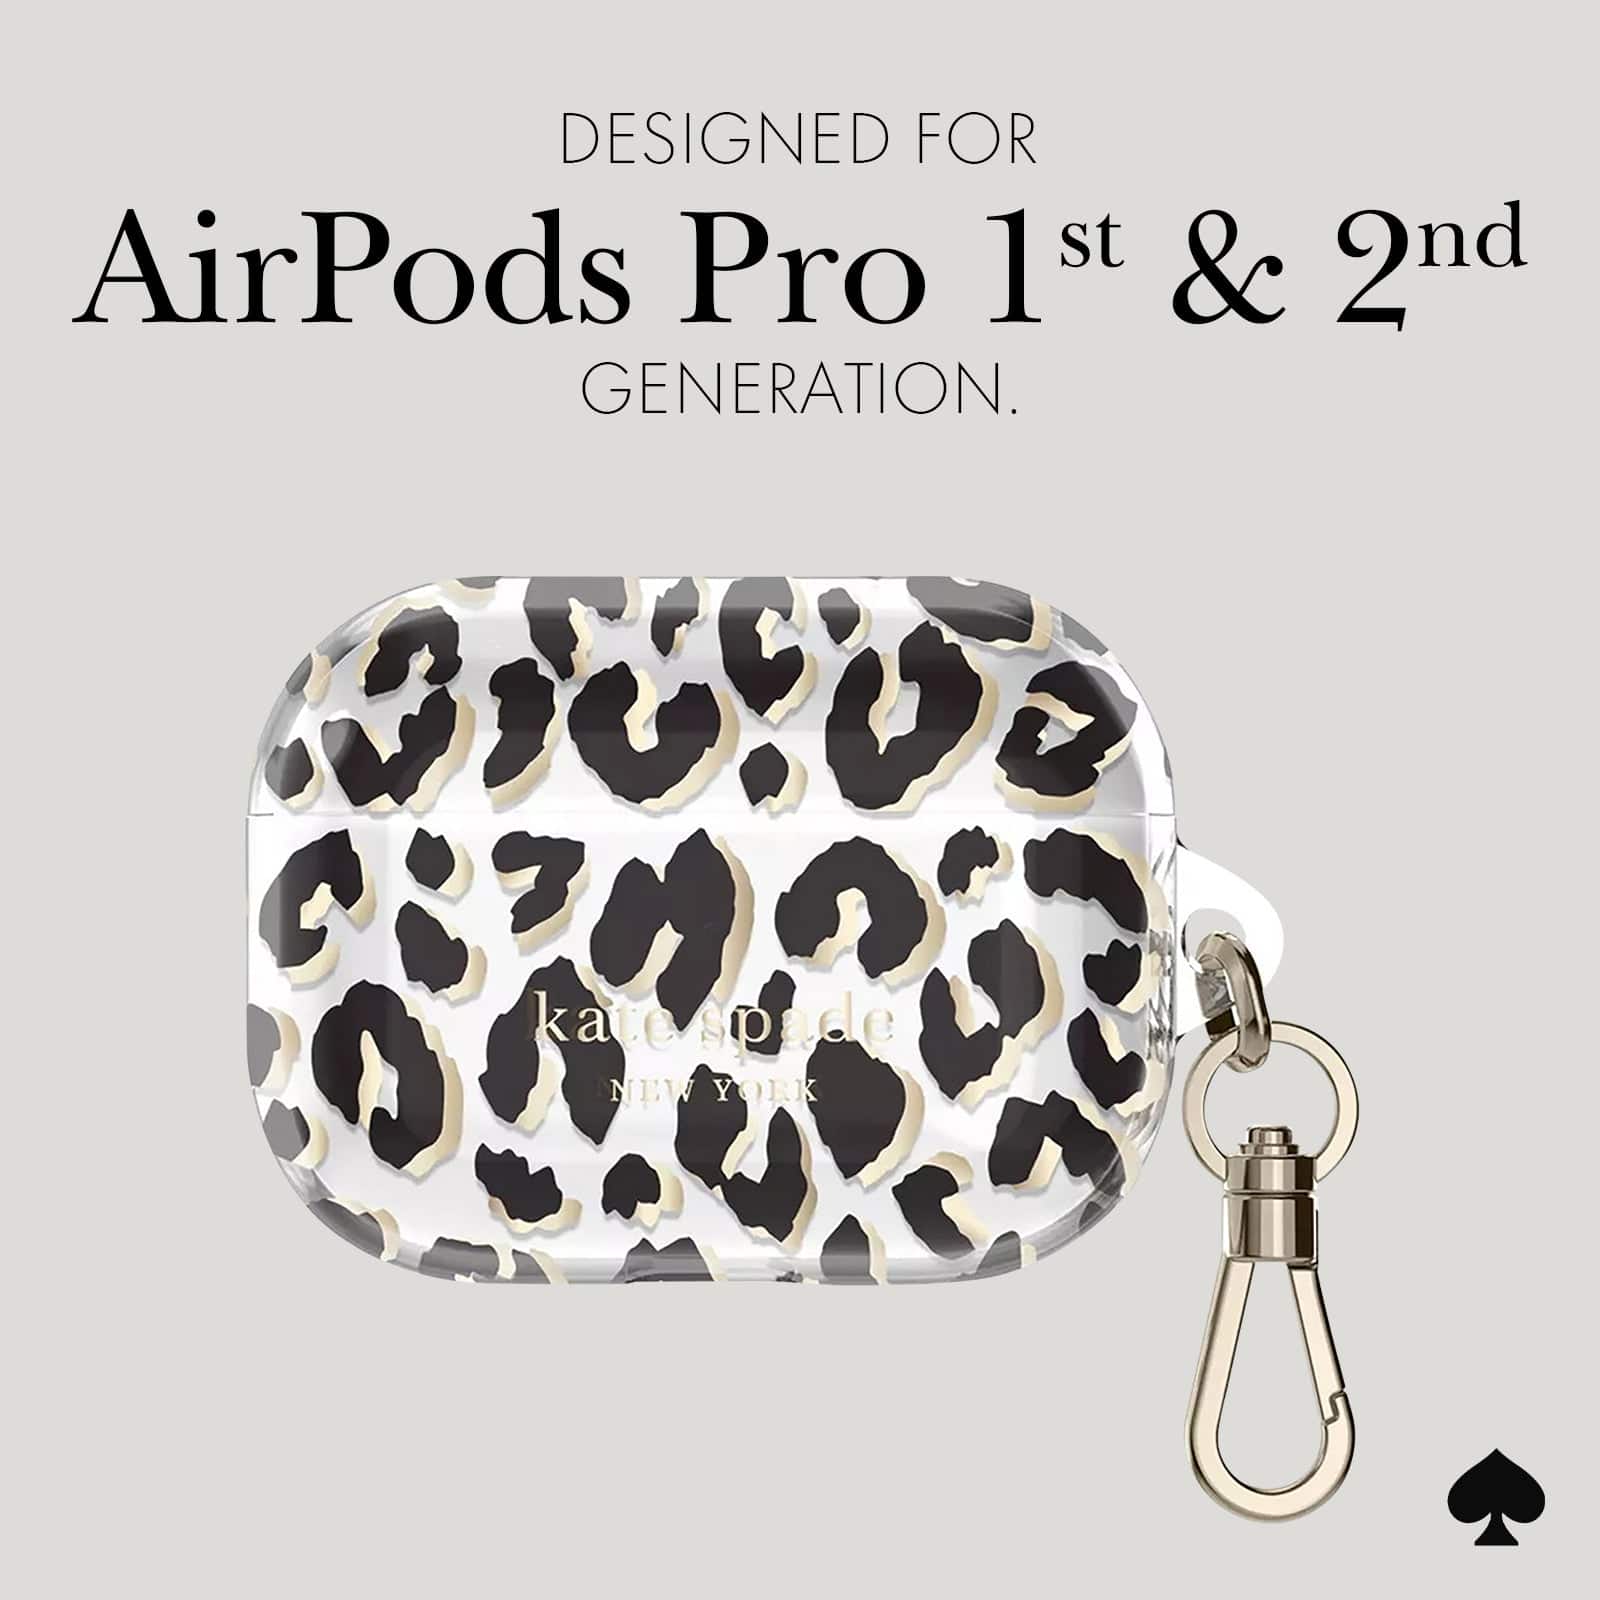 DESIGNED FOR AIRPODS PRO 1ST AND 2ND GENERATION